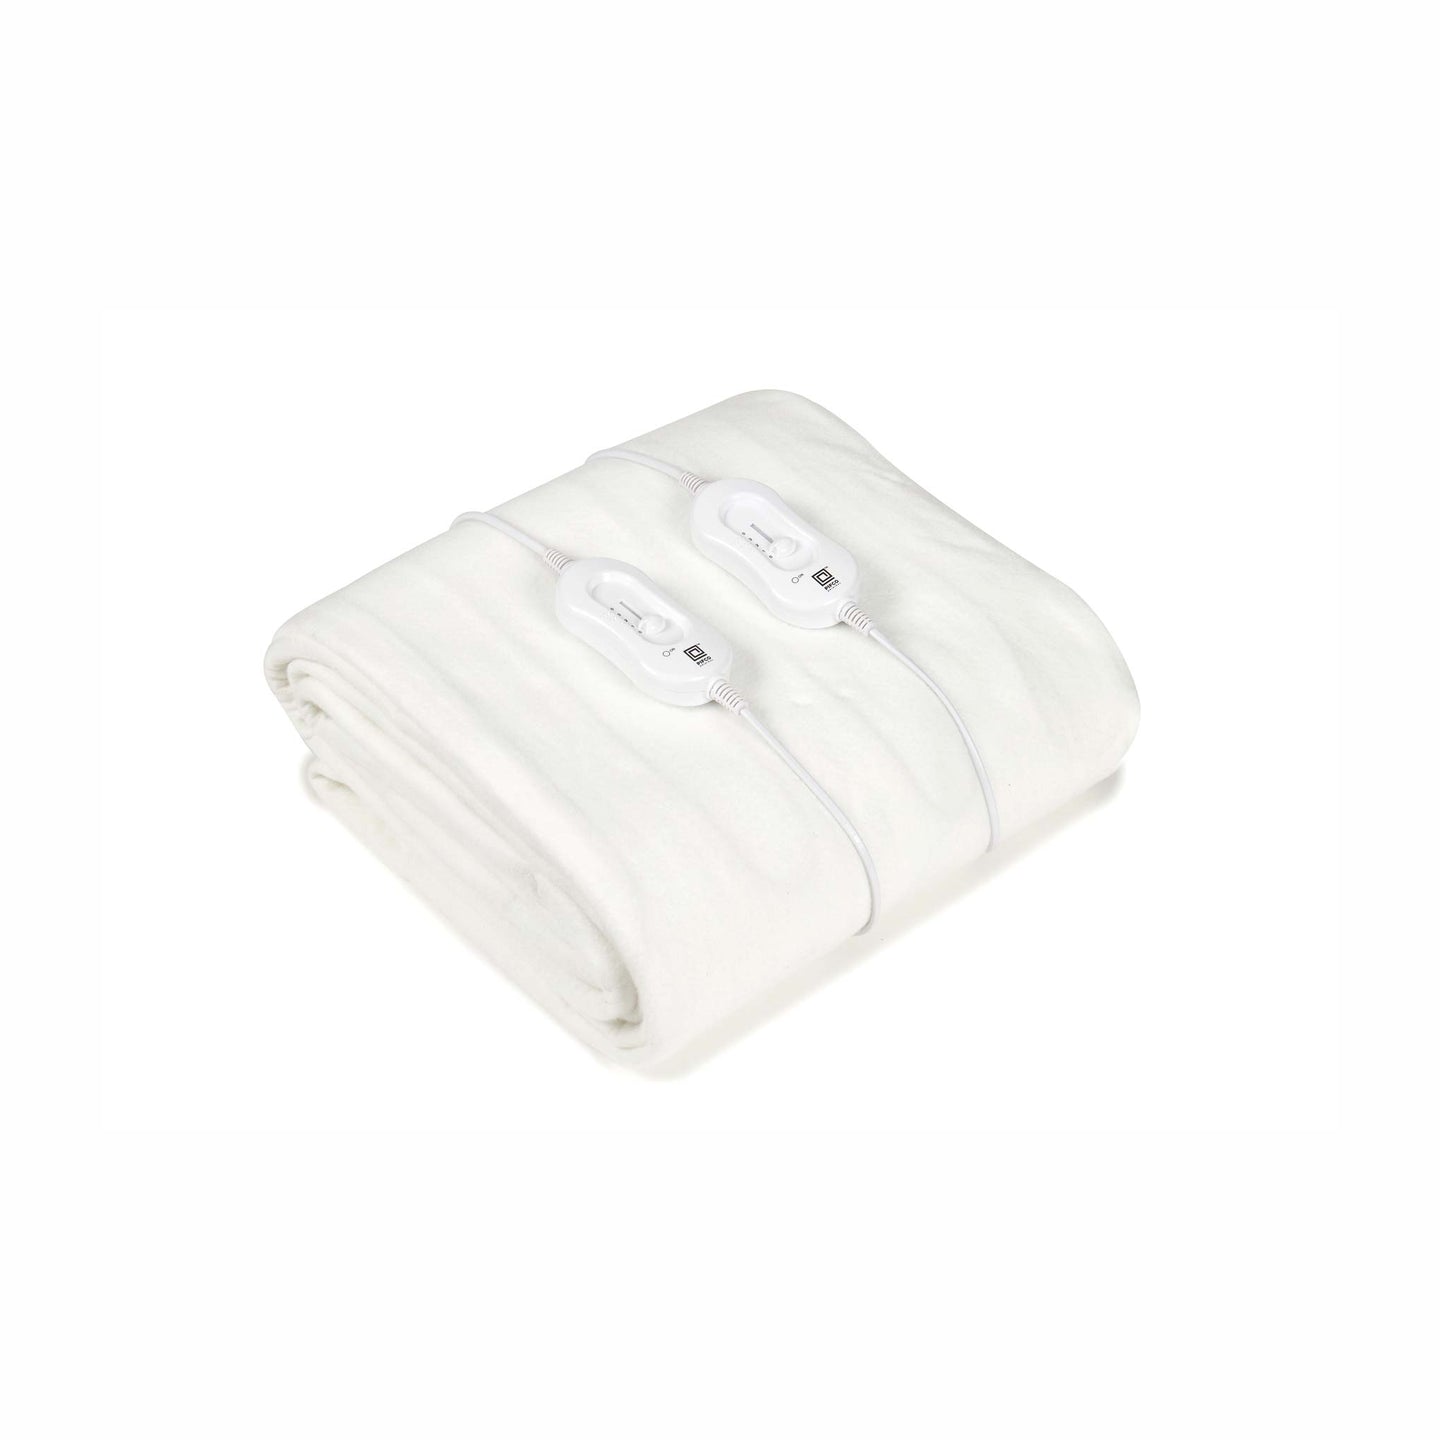 PIFCO King Dual Control Electric Blanket